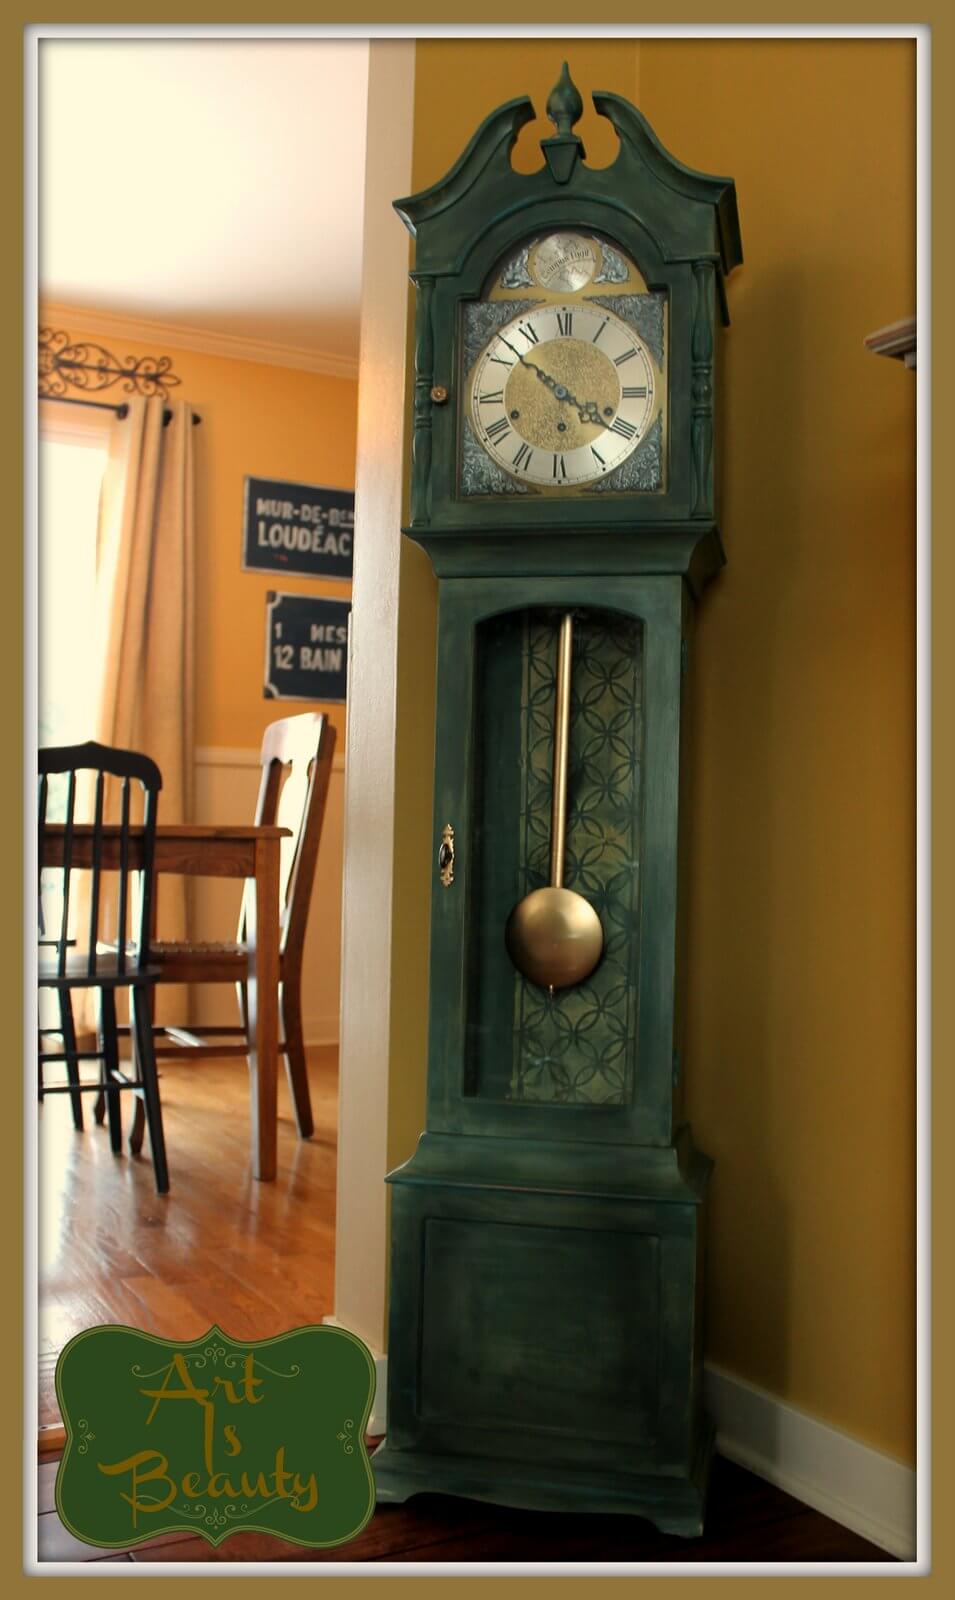 Stunning Grandfather Clock Adds Vintage Appeal